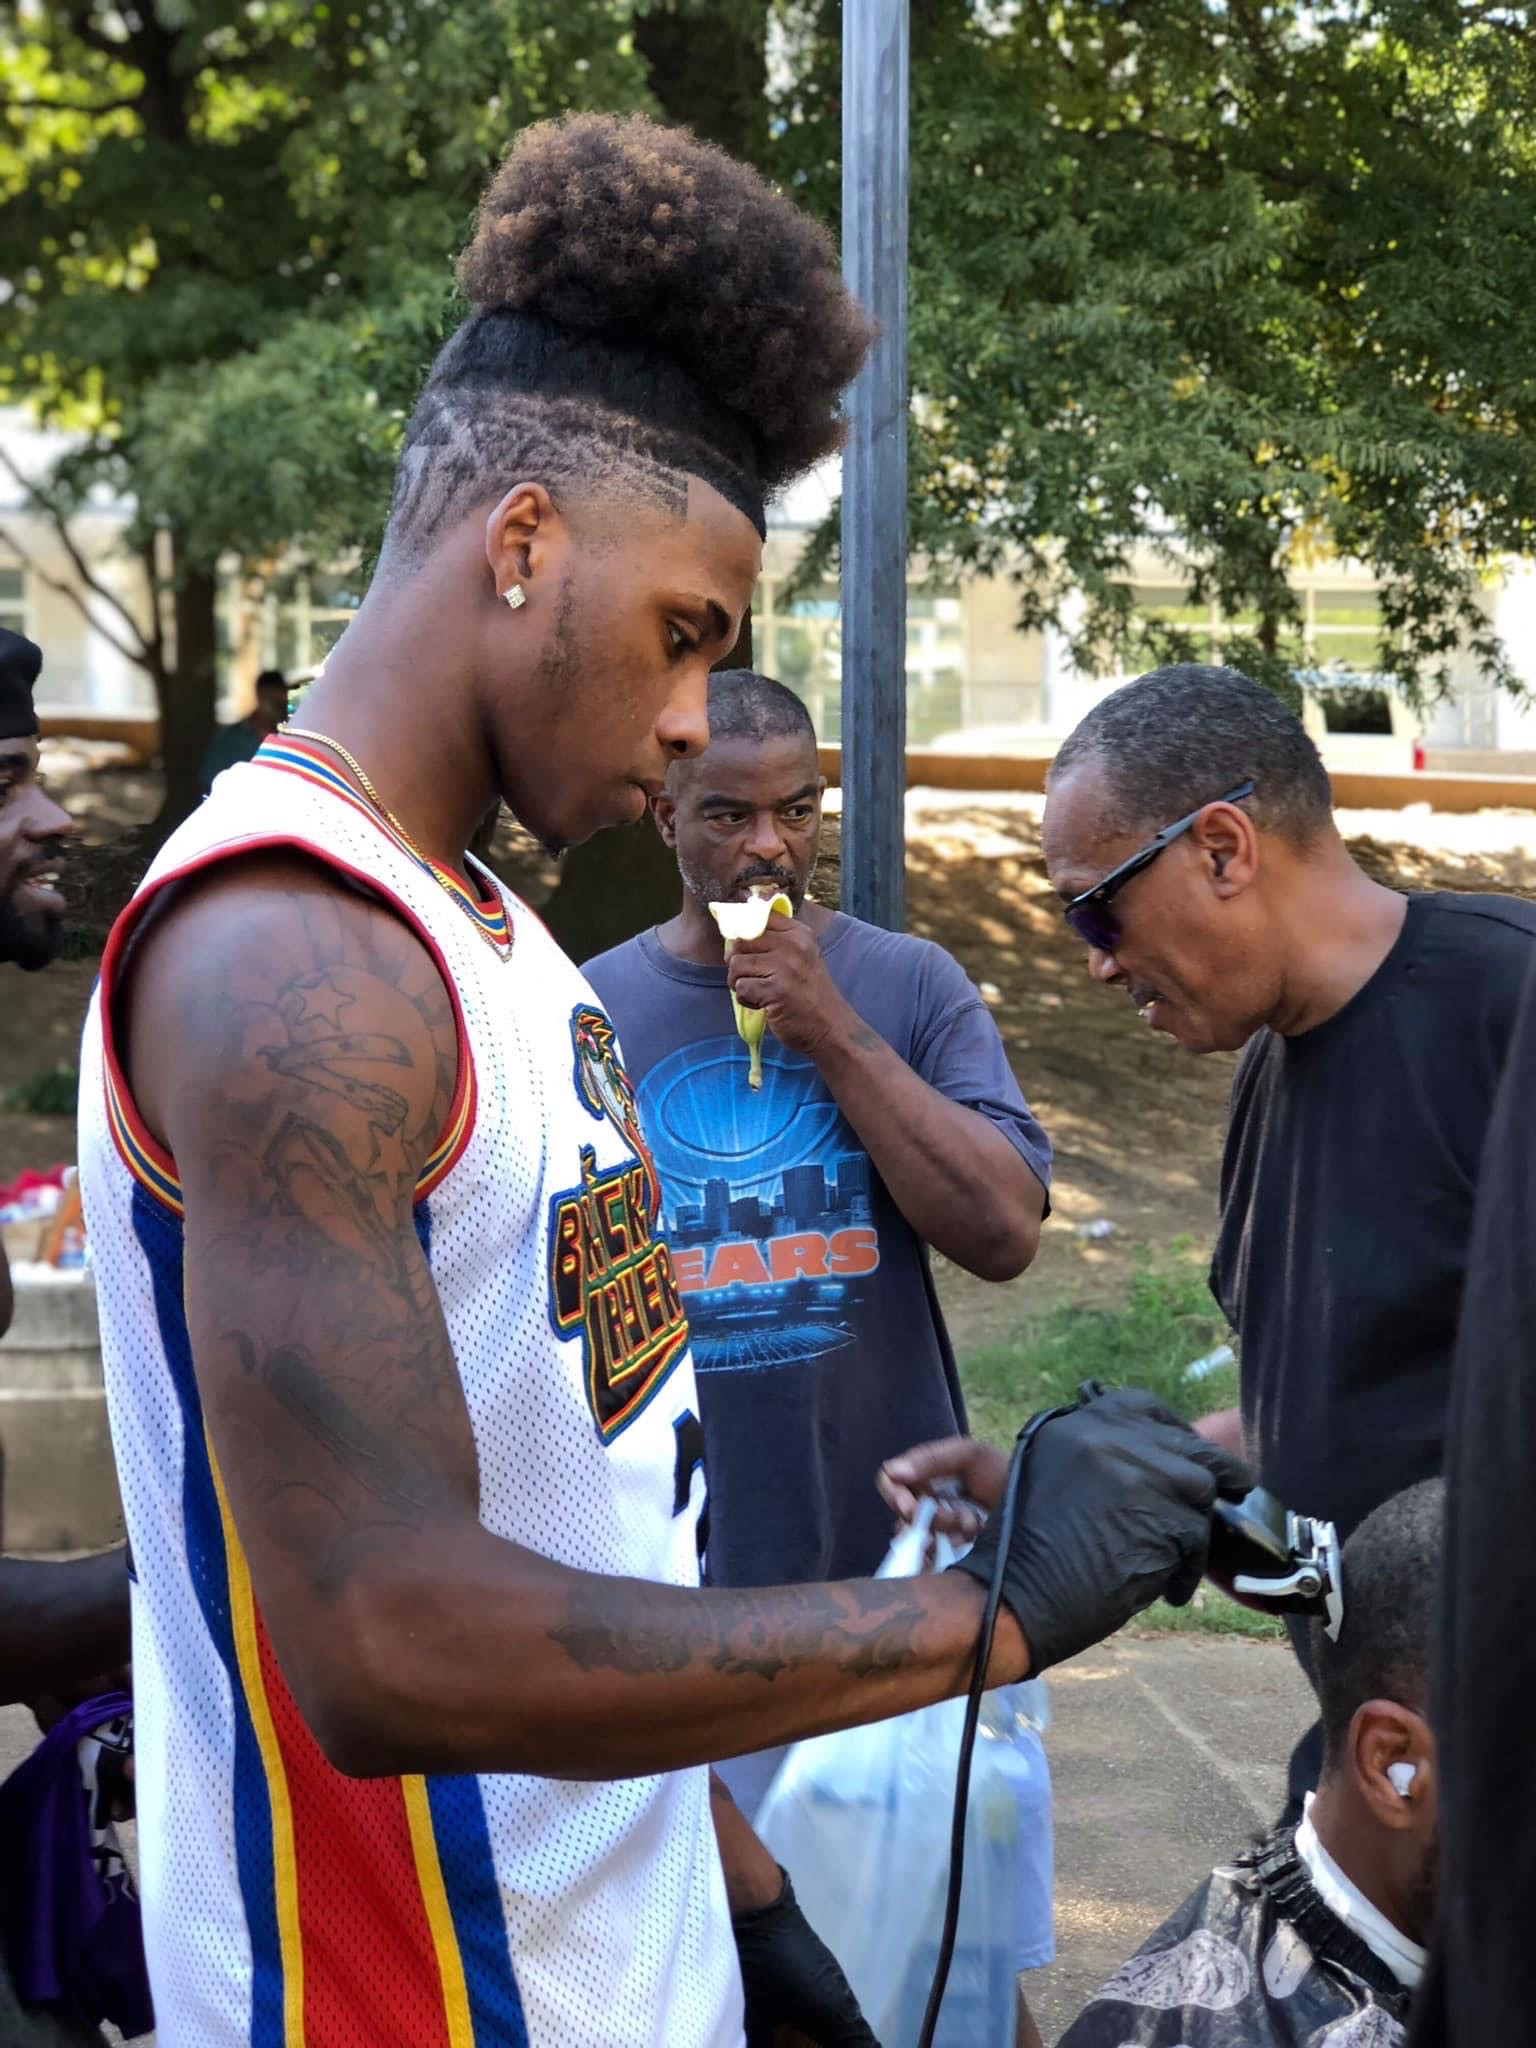 Local Entrepreneur Gives Out Free Haircuts To The Homeless Along With Food And Hygiene Necessities At Hurt Park, Atlanta Ga.